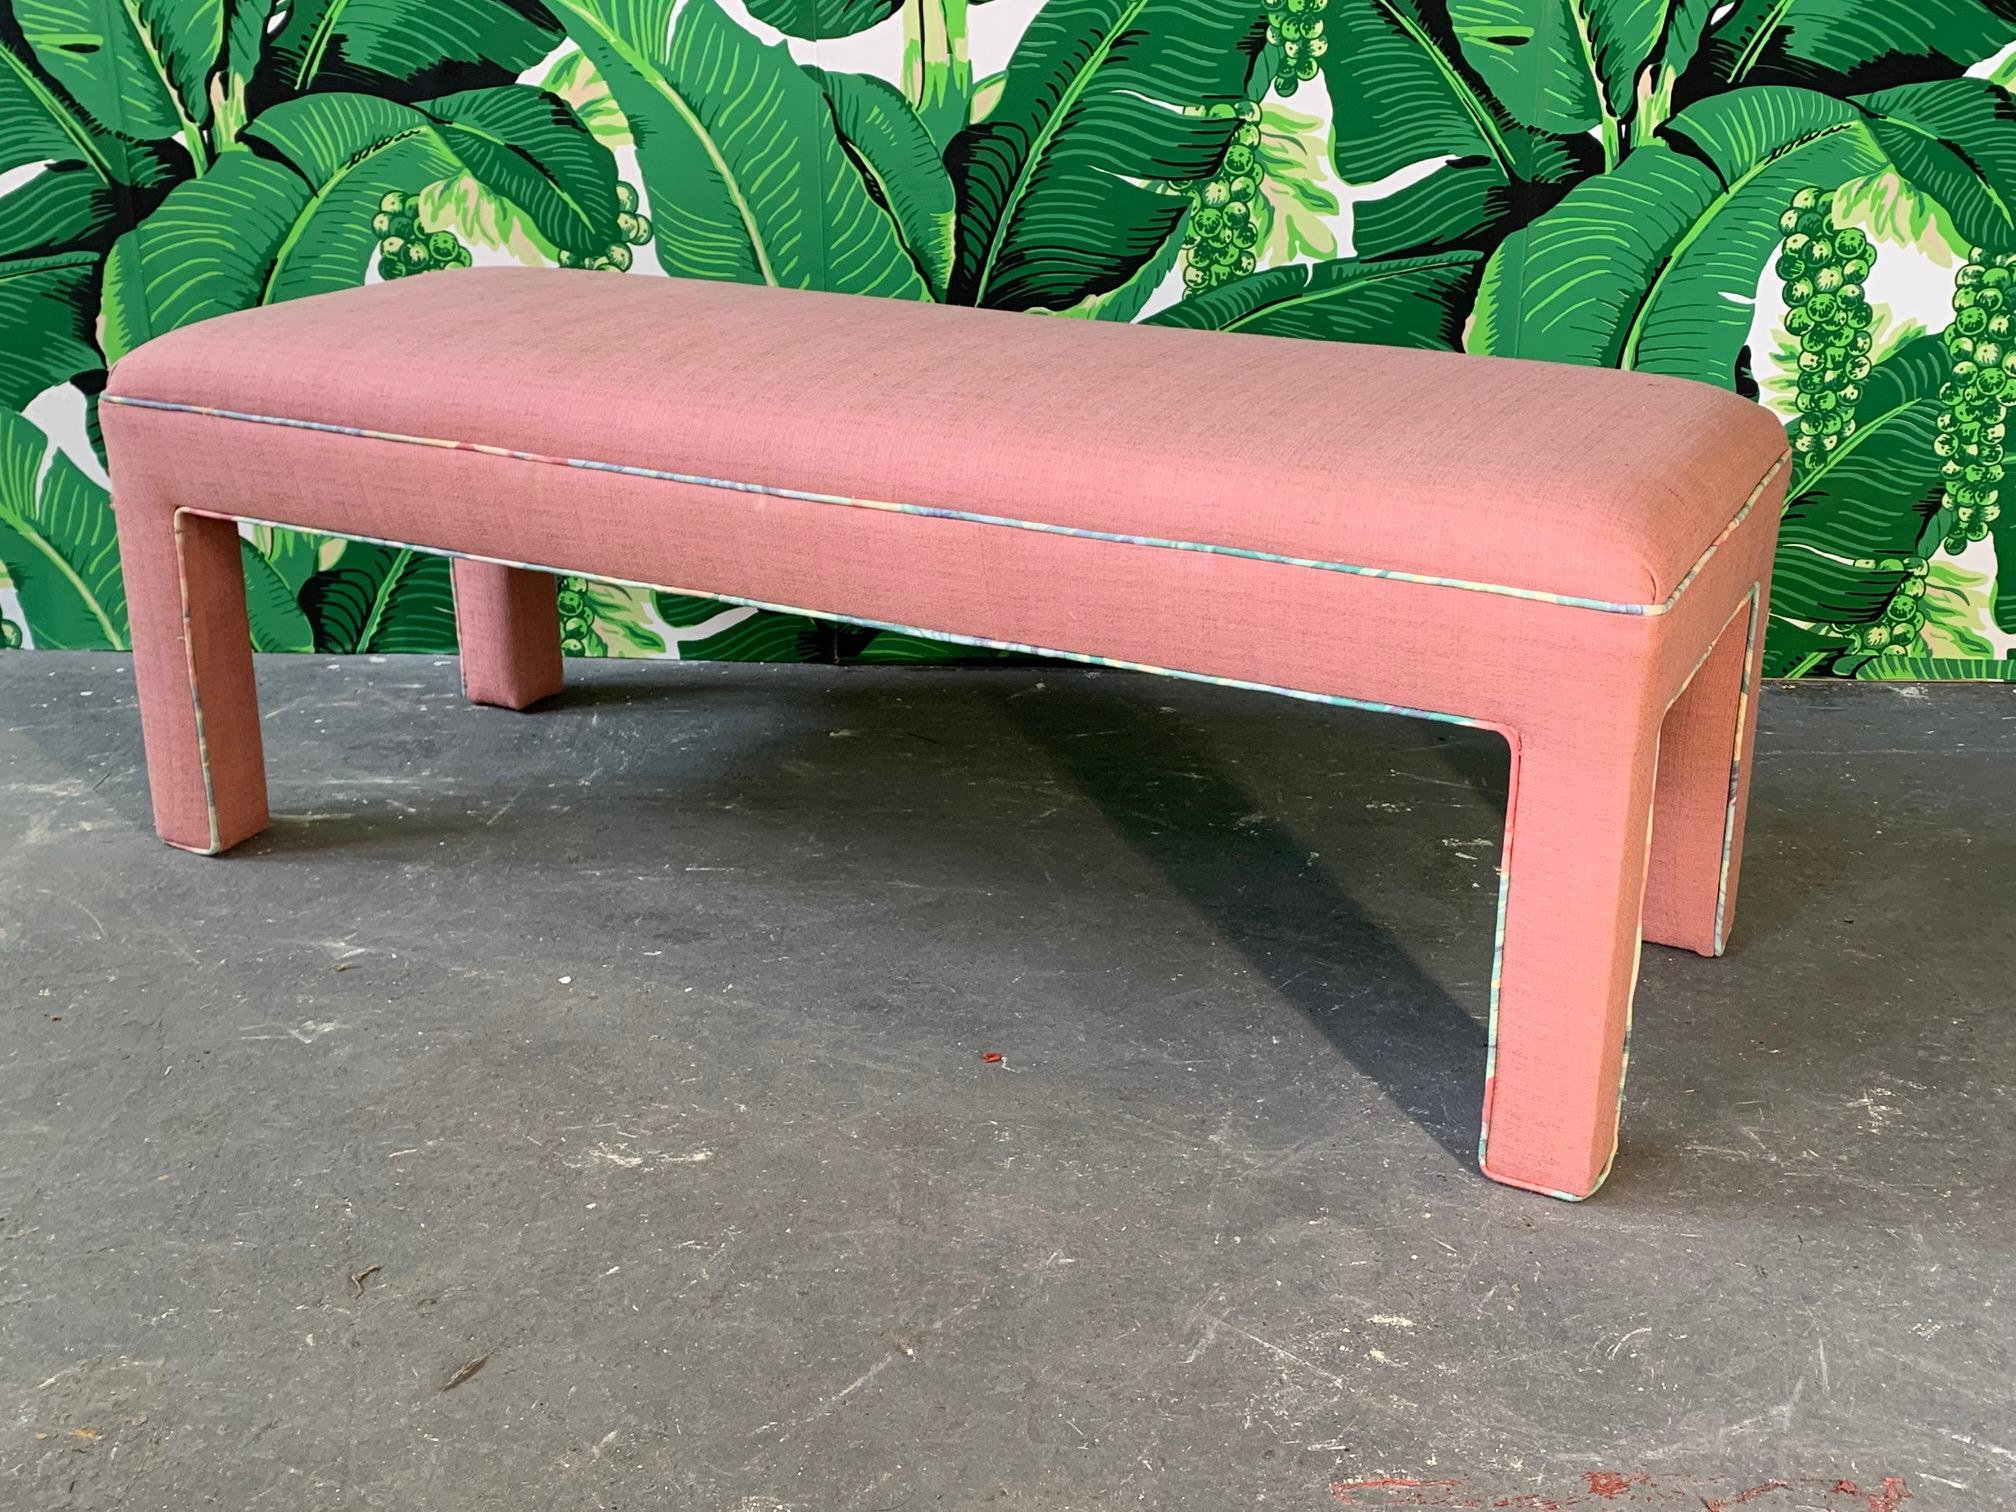 Upholstered bench or ottoman in true 1980s style. Pink with pastel tropical piping. Very good condition.
    